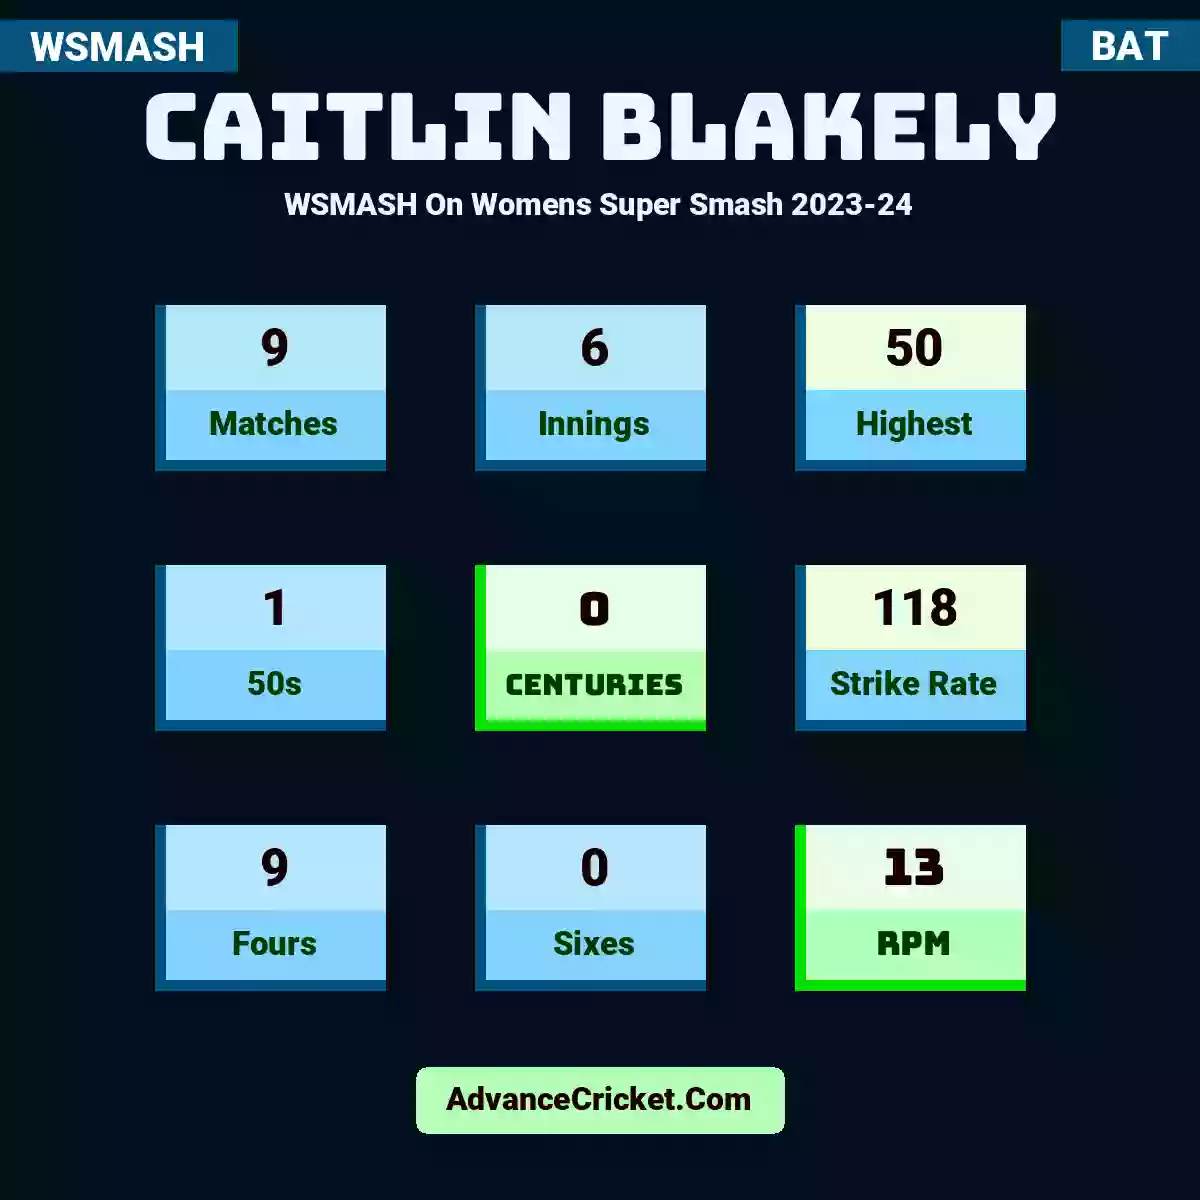 Caitlin Blakely WSMASH  On Womens Super Smash 2023-24, Caitlin Blakely played 9 matches, scored 50 runs as highest, 1 half-centuries, and 0 centuries, with a strike rate of 118. C.Blakely hit 9 fours and 0 sixes, with an RPM of 13.